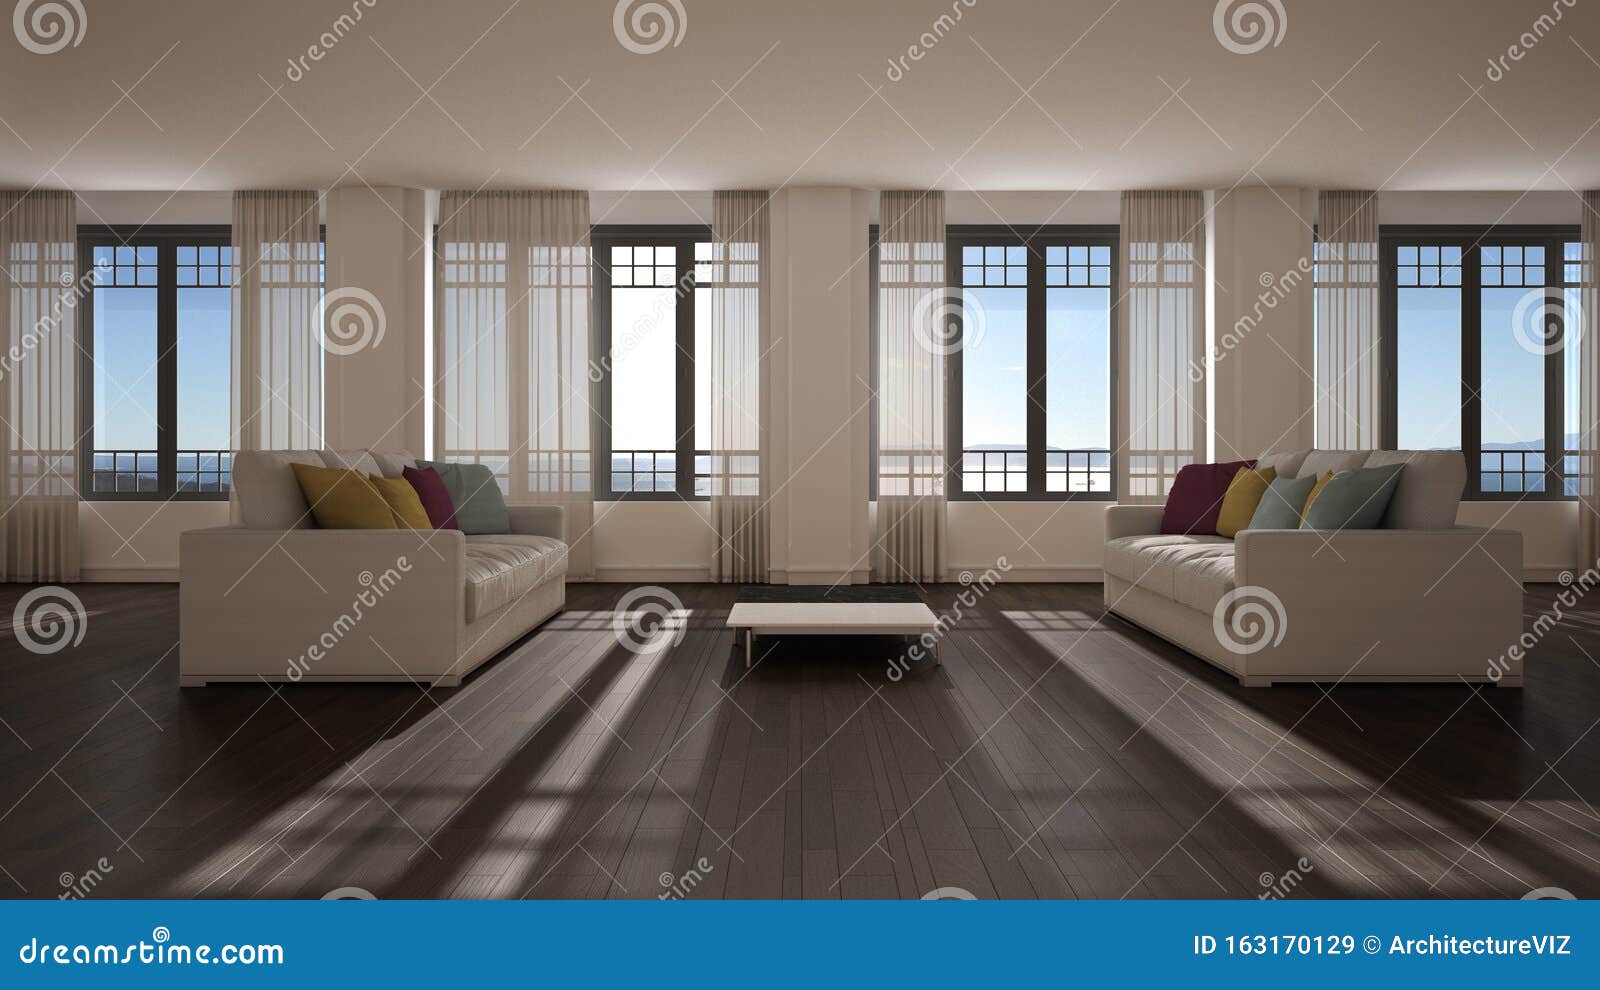 Open Space With Sofa Interior Design Modern Living Room Lounge With Big Panoramic Windows With Curtains And Sea View Parquet Stock Illustration Illustration Of Elegant Furniture 163170129,Handmade Greeting Card Border Designs Simple